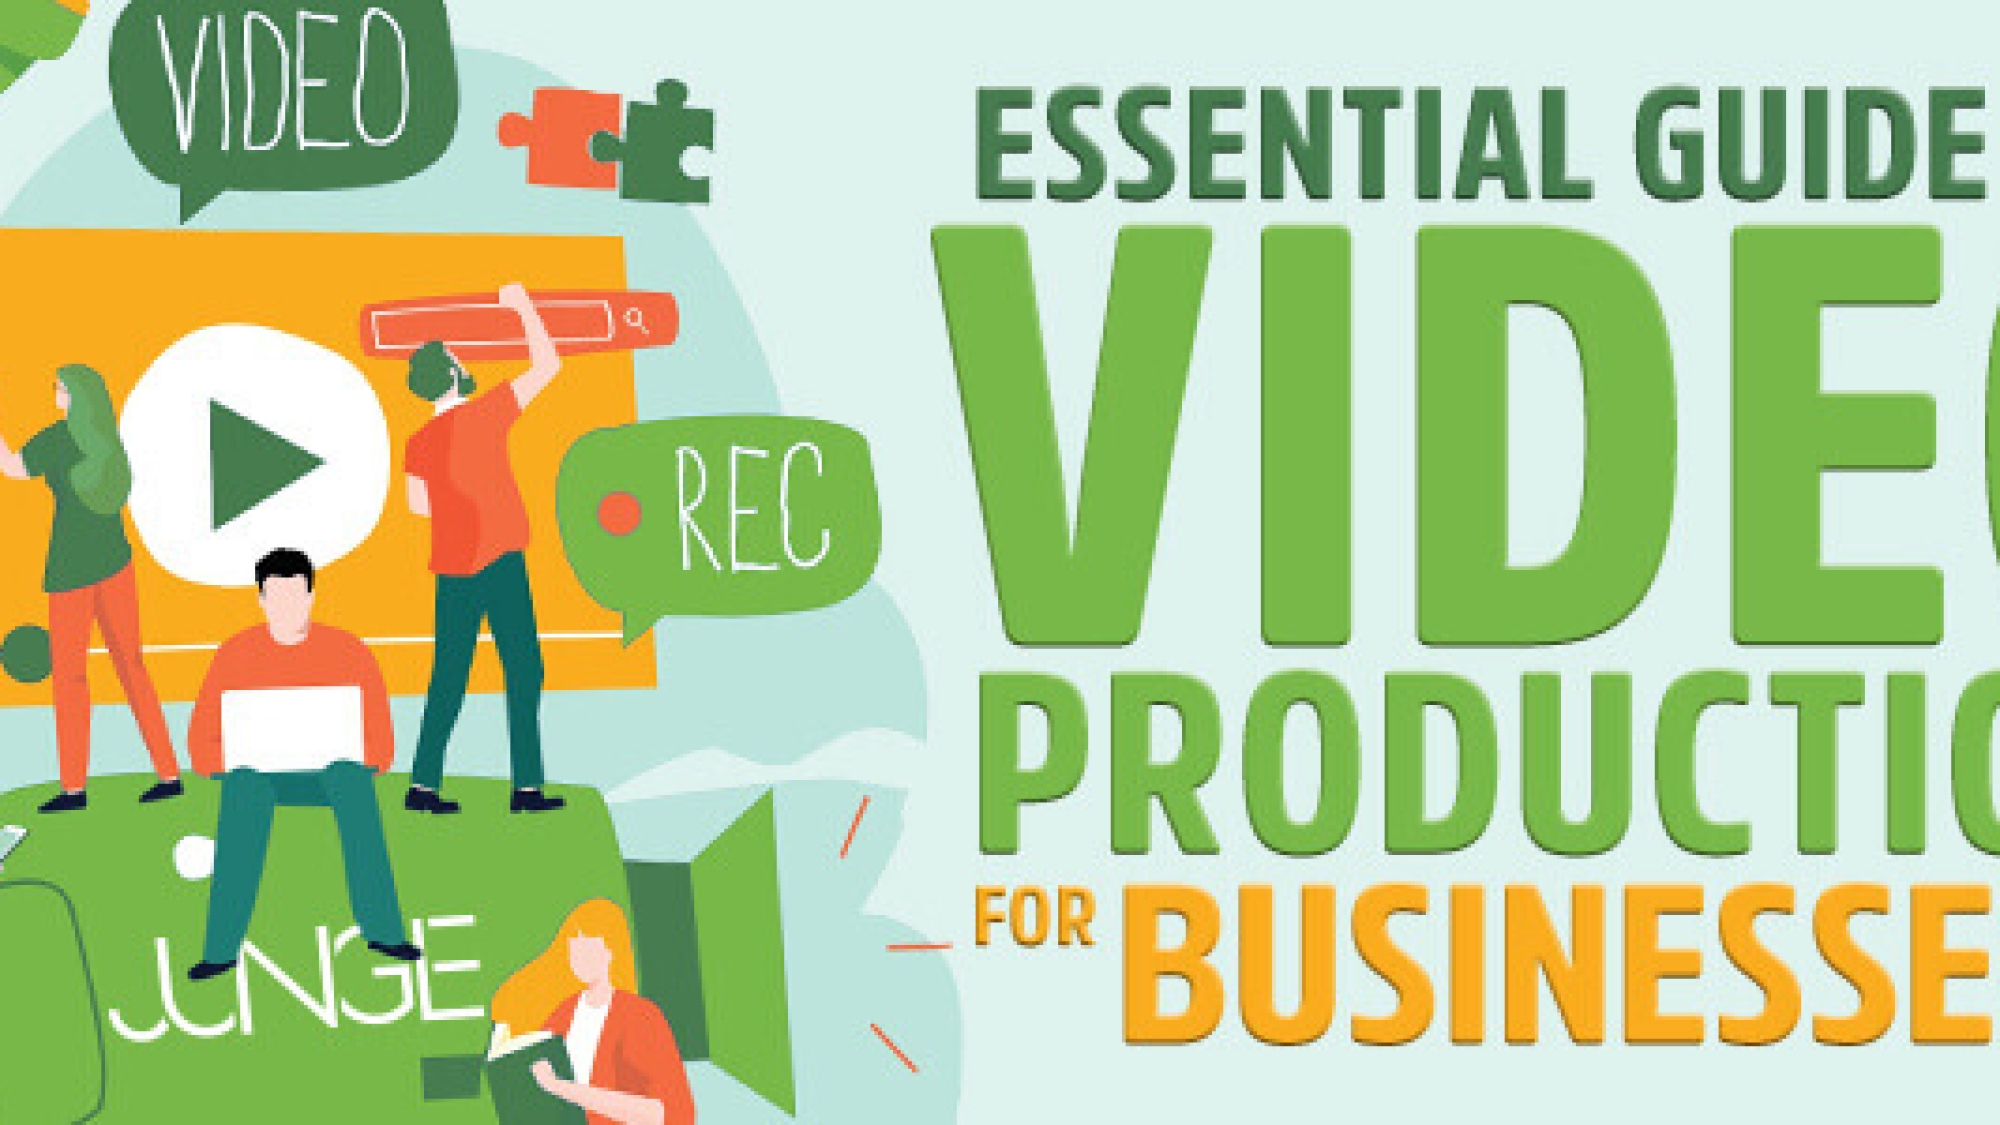 240315-JCI-Blog-Post-Essential-Guide-on-Video-Production-for-Businesses-767x300-2.jpg